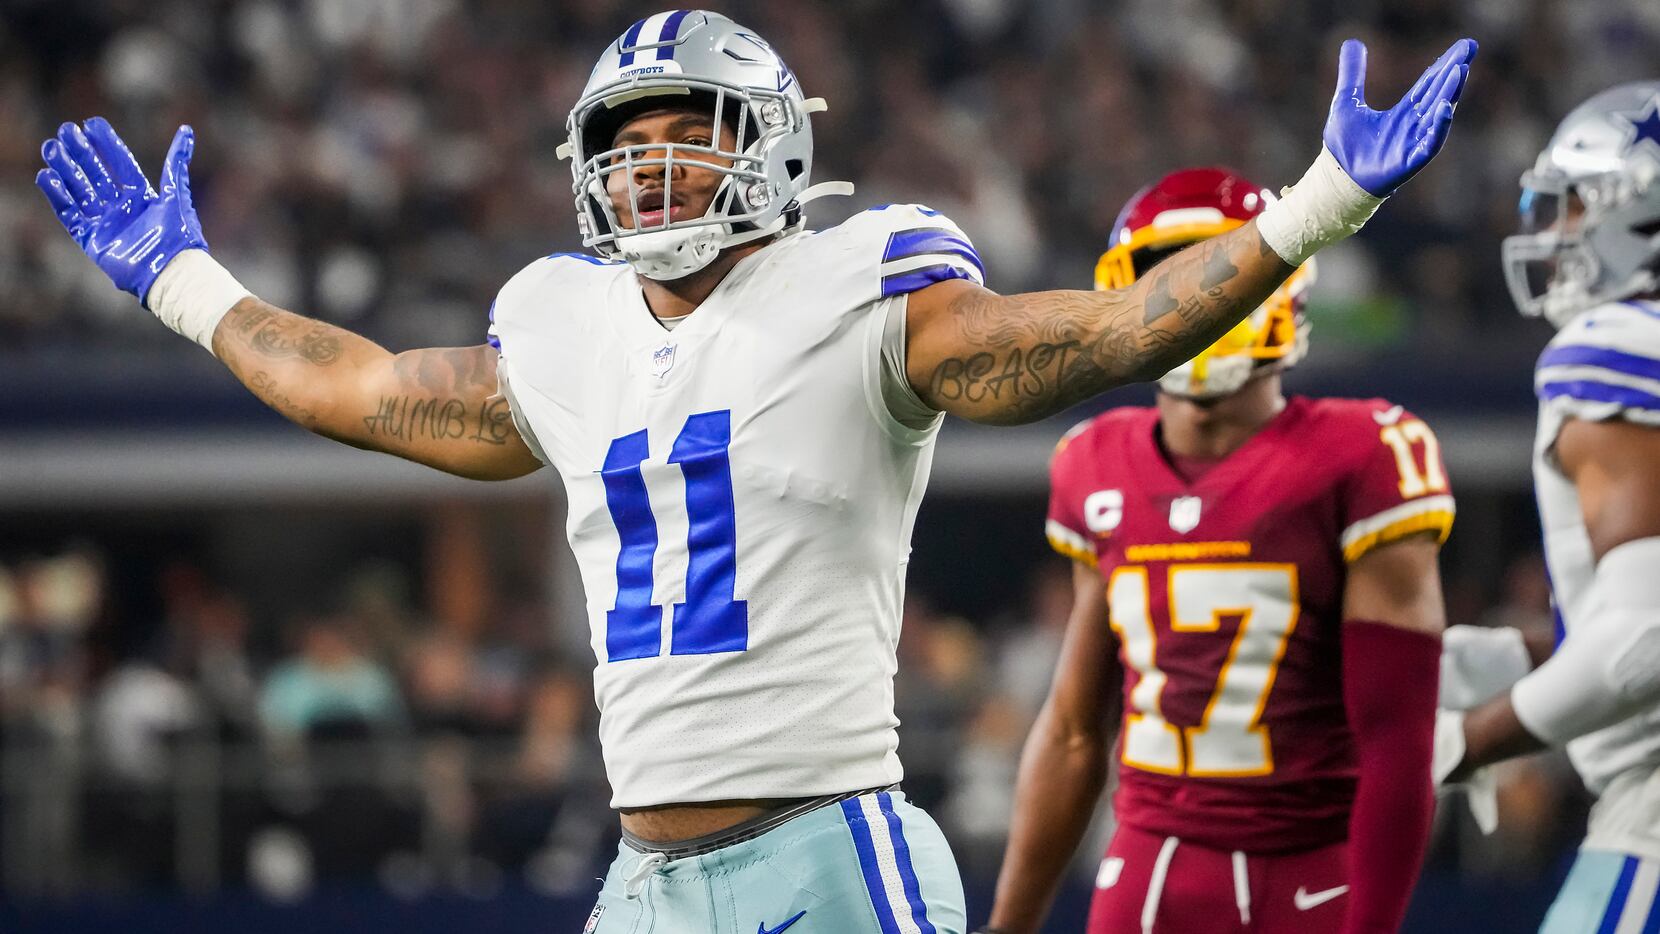 More than half the Cowboys' active roster wasn't alive the last